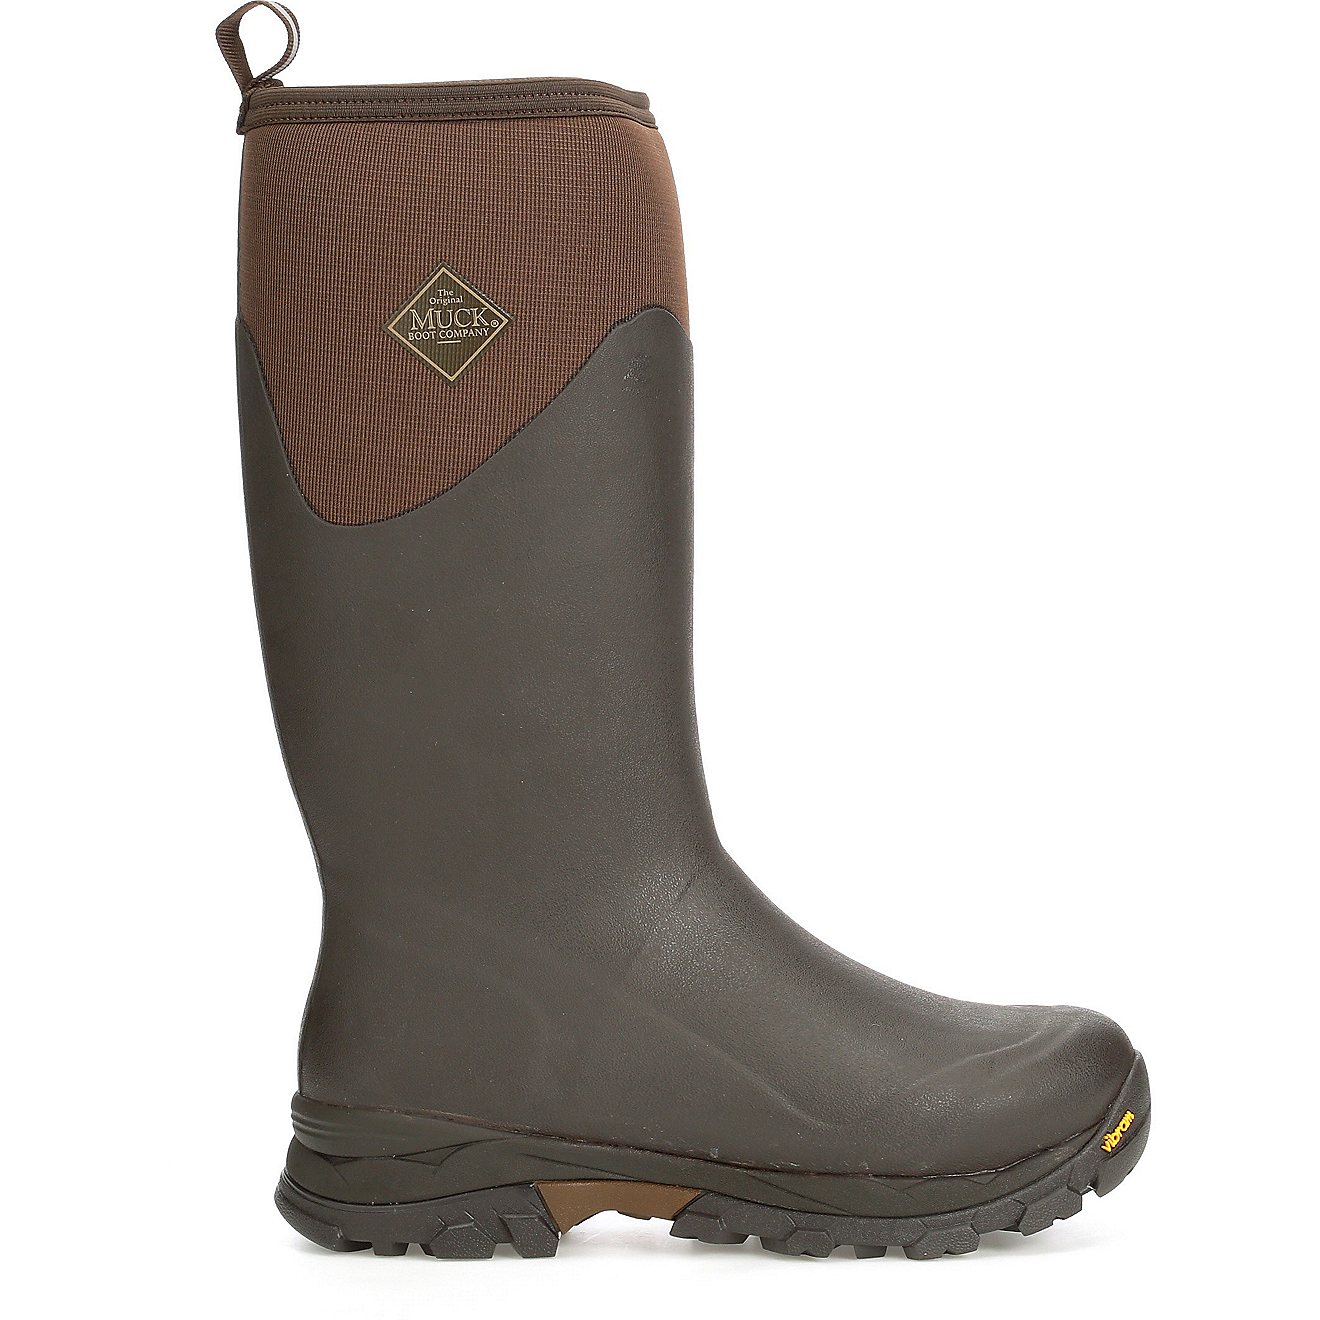 Muck Boots ARCTIC ICE TALL Mens Outdoor Waterproof Rubber Wellington Boots Brown